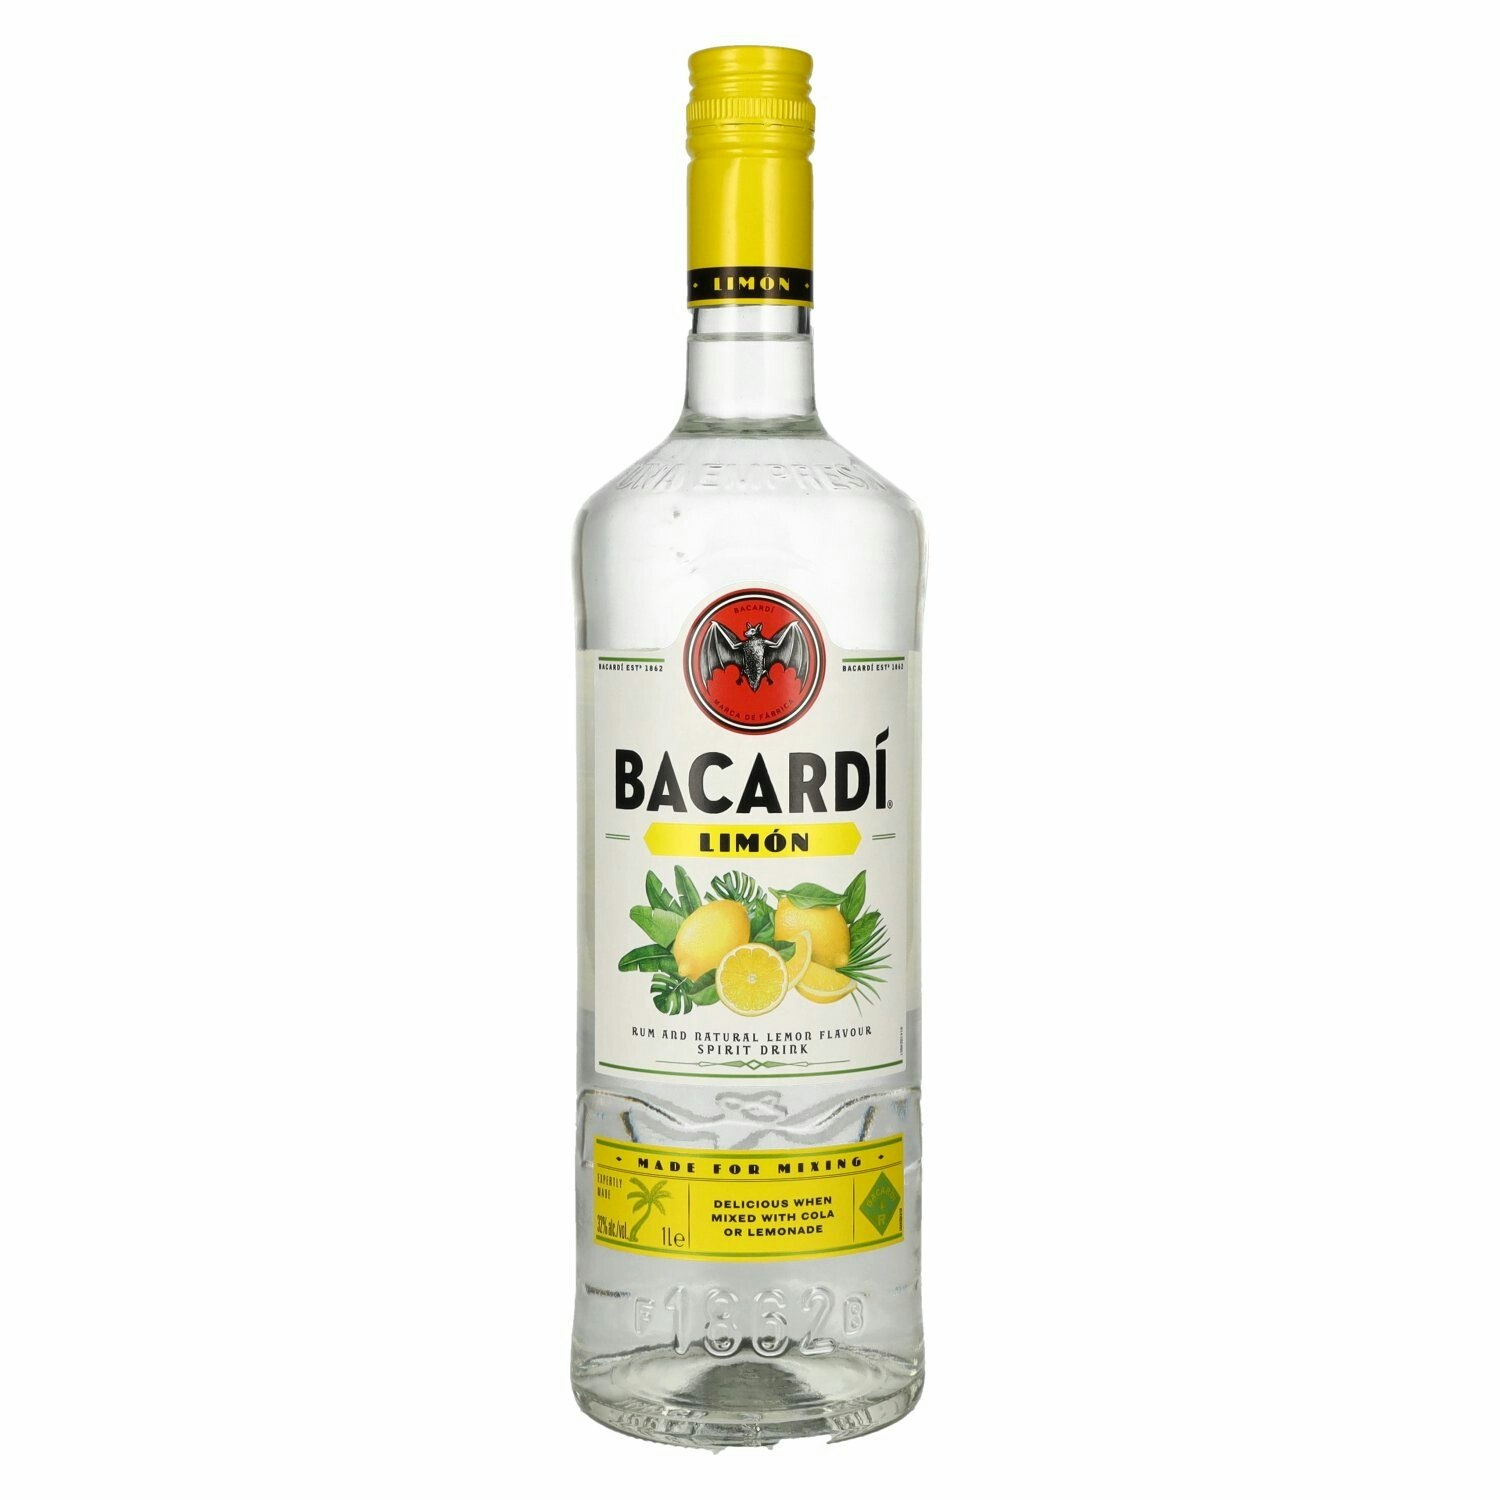 Bacardi LIMÓN Rum With Natural Flavors 32% Vol. 1l